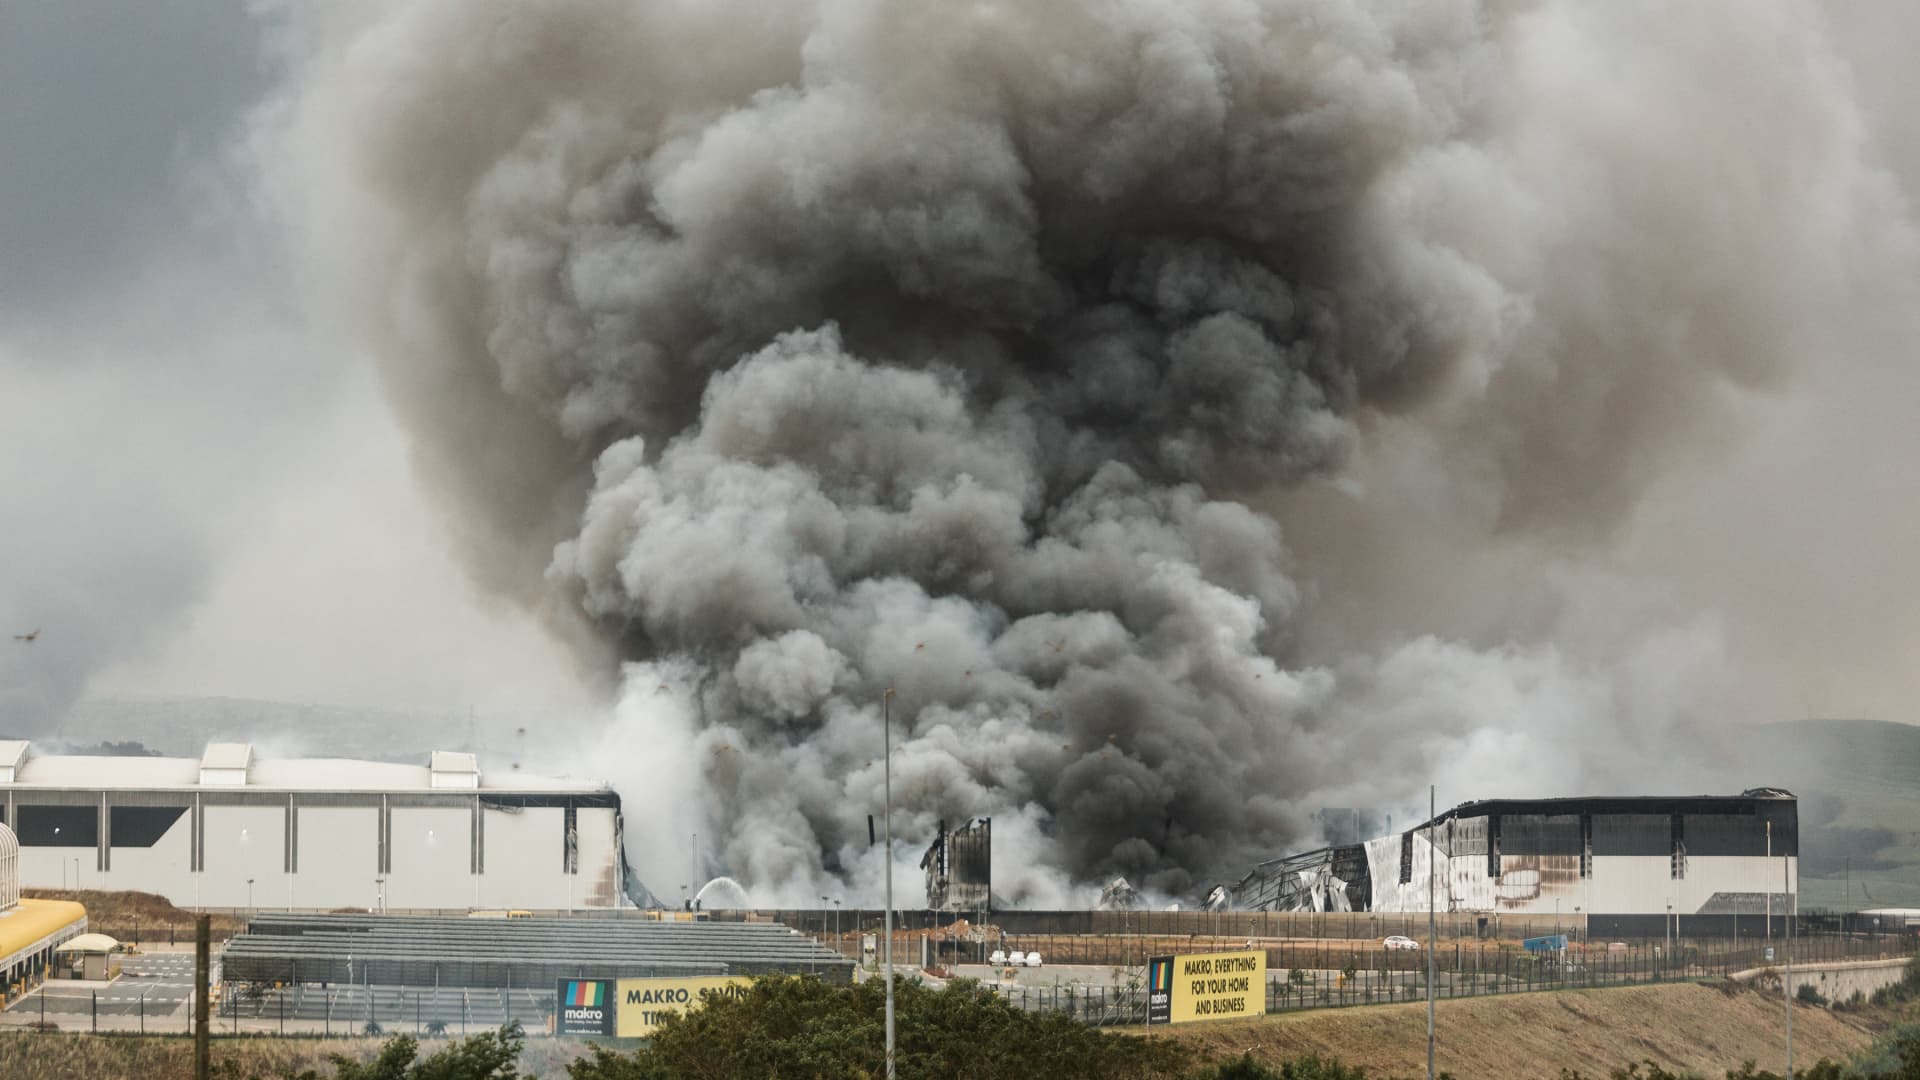 Smoke rises from a Makro building set on fire overnight in Umhlanga, north of Durban, on July 13, 2021 as several shops, businesses and infrastructure are damaged in the city, following four nights of continued violence and looting sparked by the jailing of ex-president Jacob Zuma.